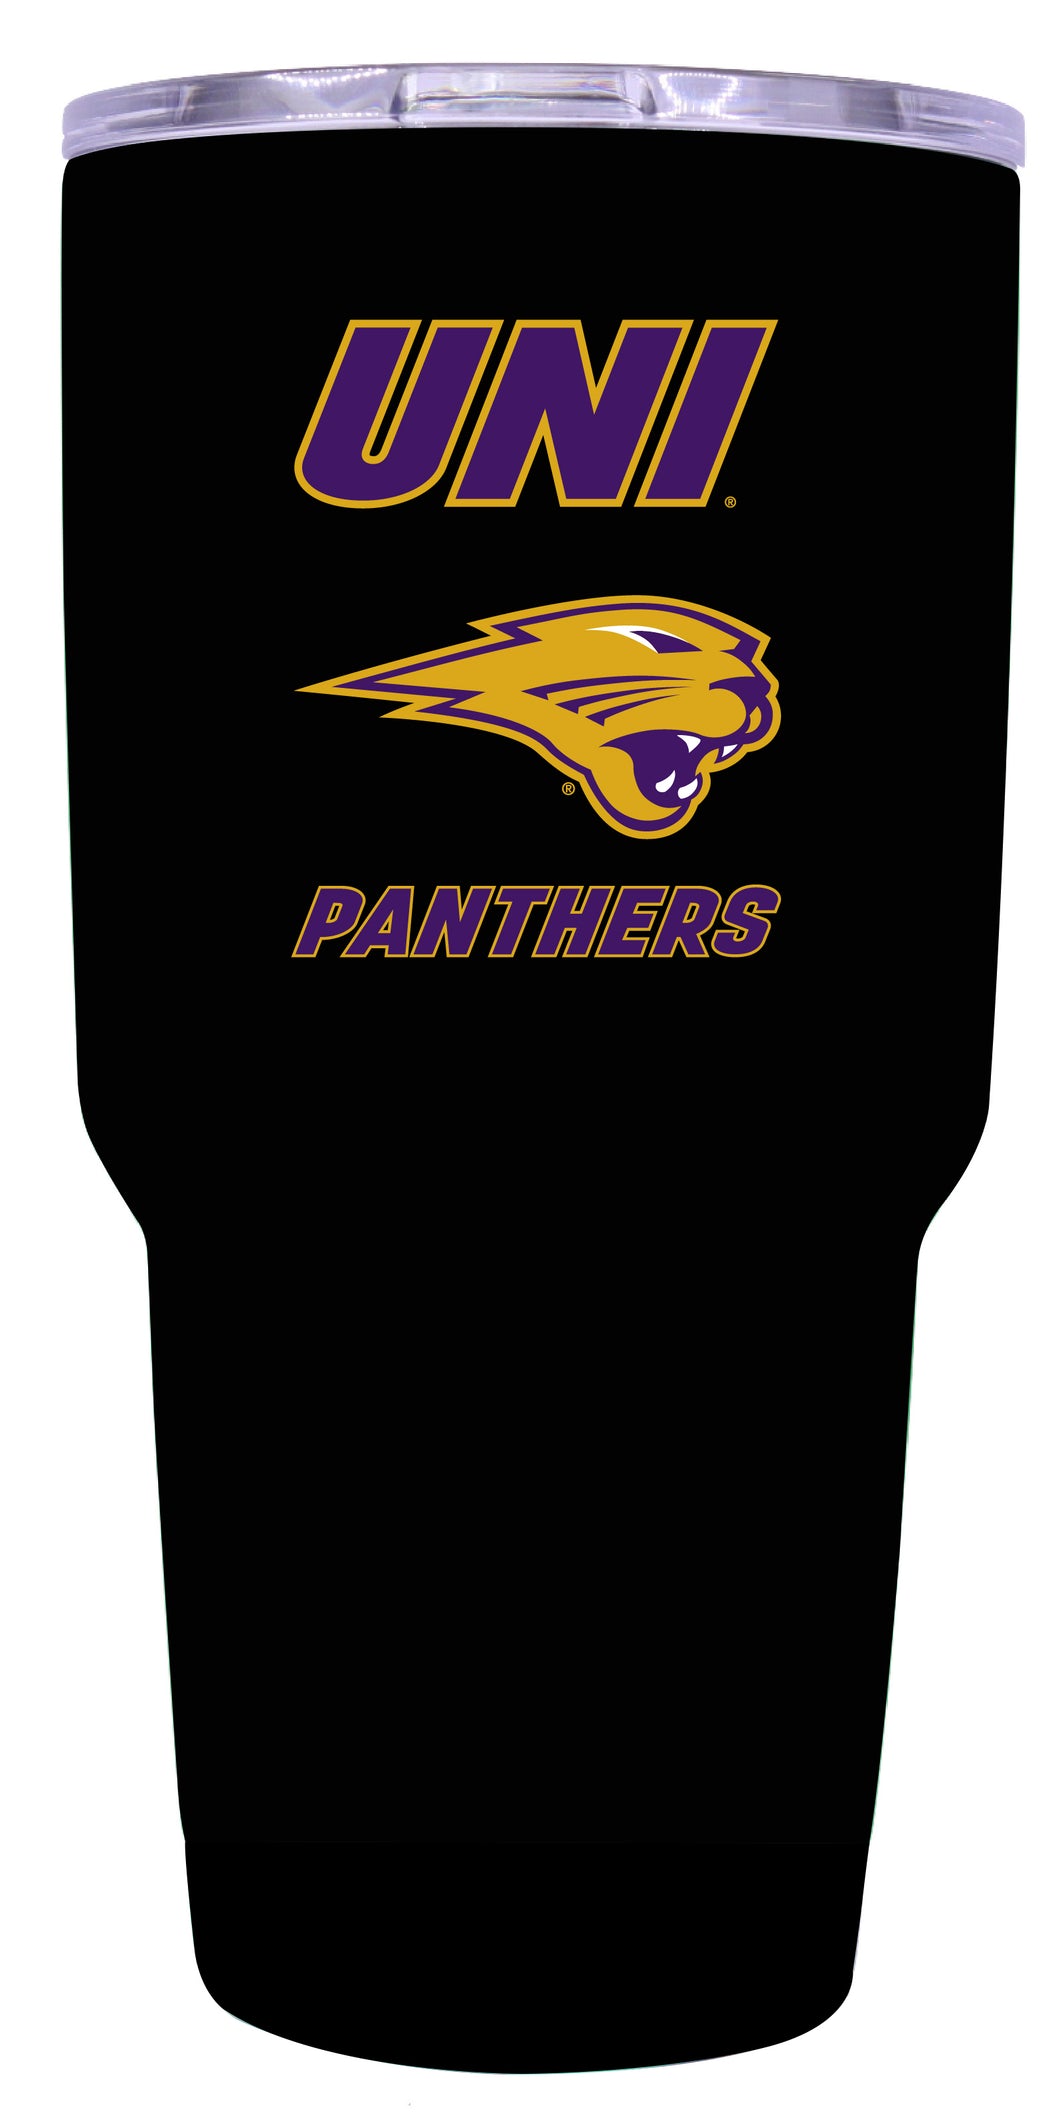 Northern Iowa Panthers Mascot Logo Tumbler - 24oz Color-Choice Insulated Stainless Steel Mug